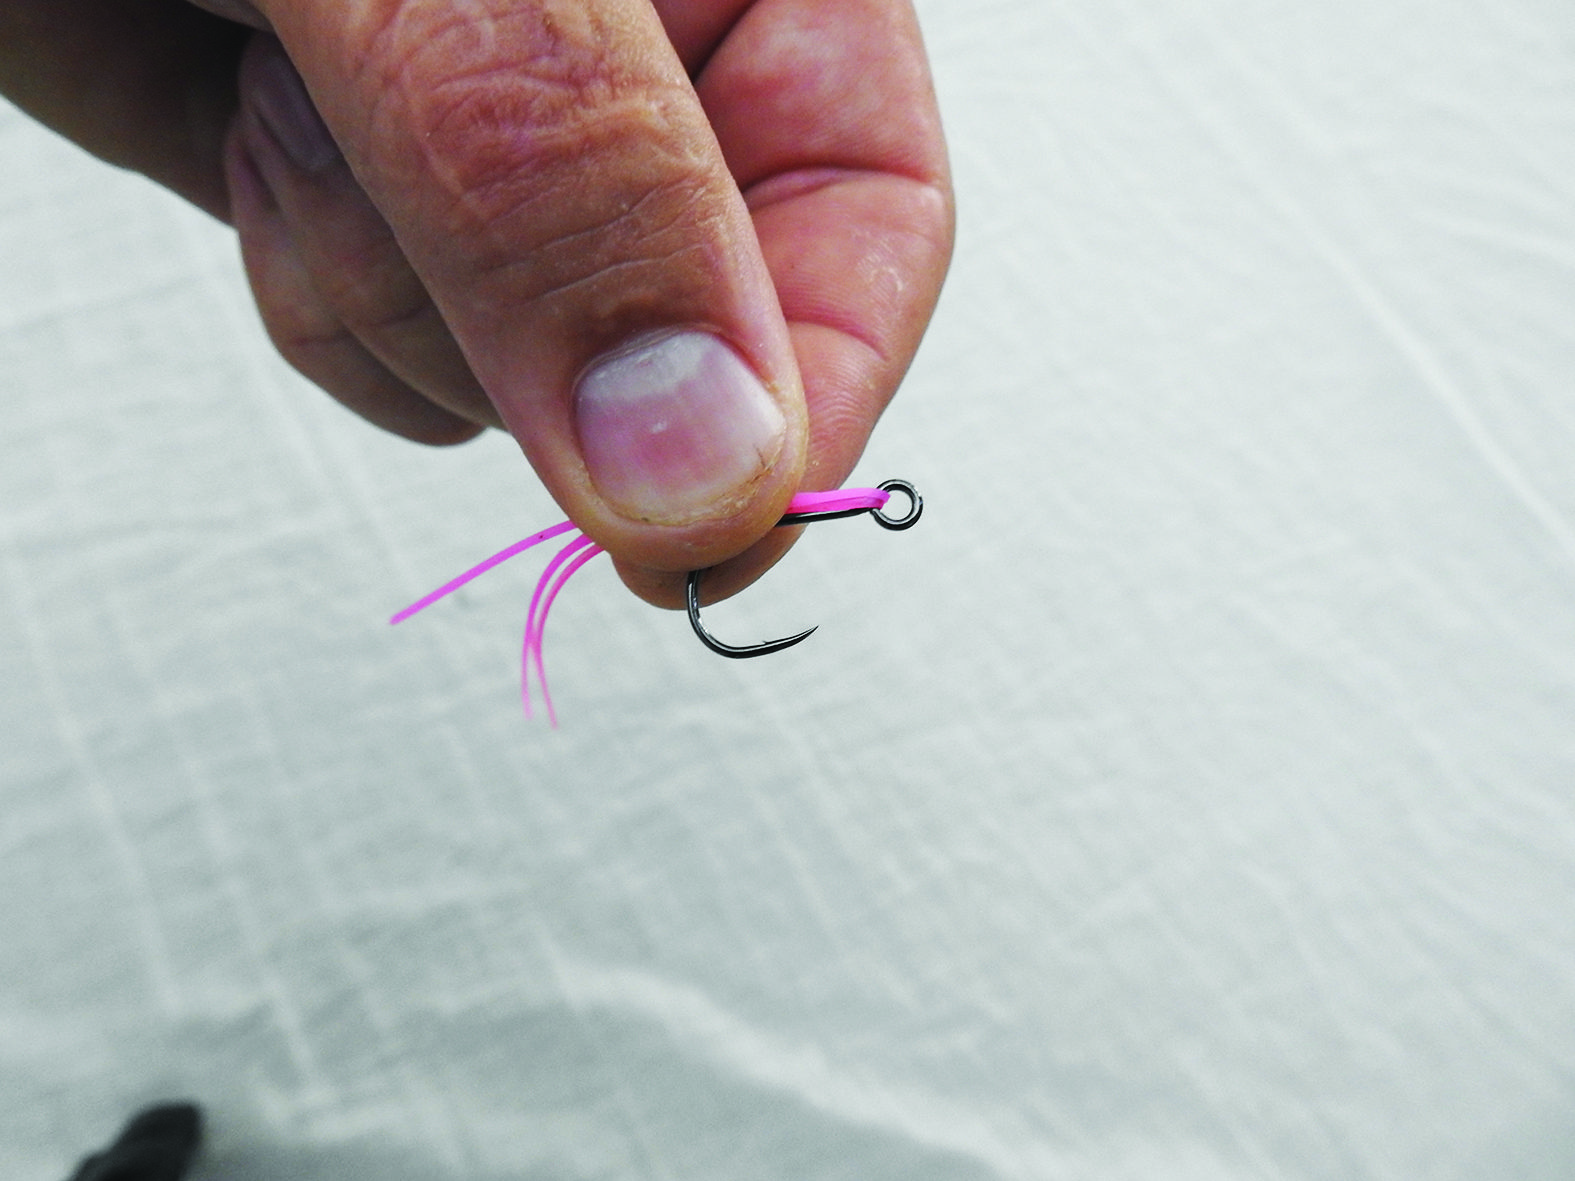 Remove the trebles, choose your skirt colour and fit the skirting through the eye of the hook prior to tying a snell knot.